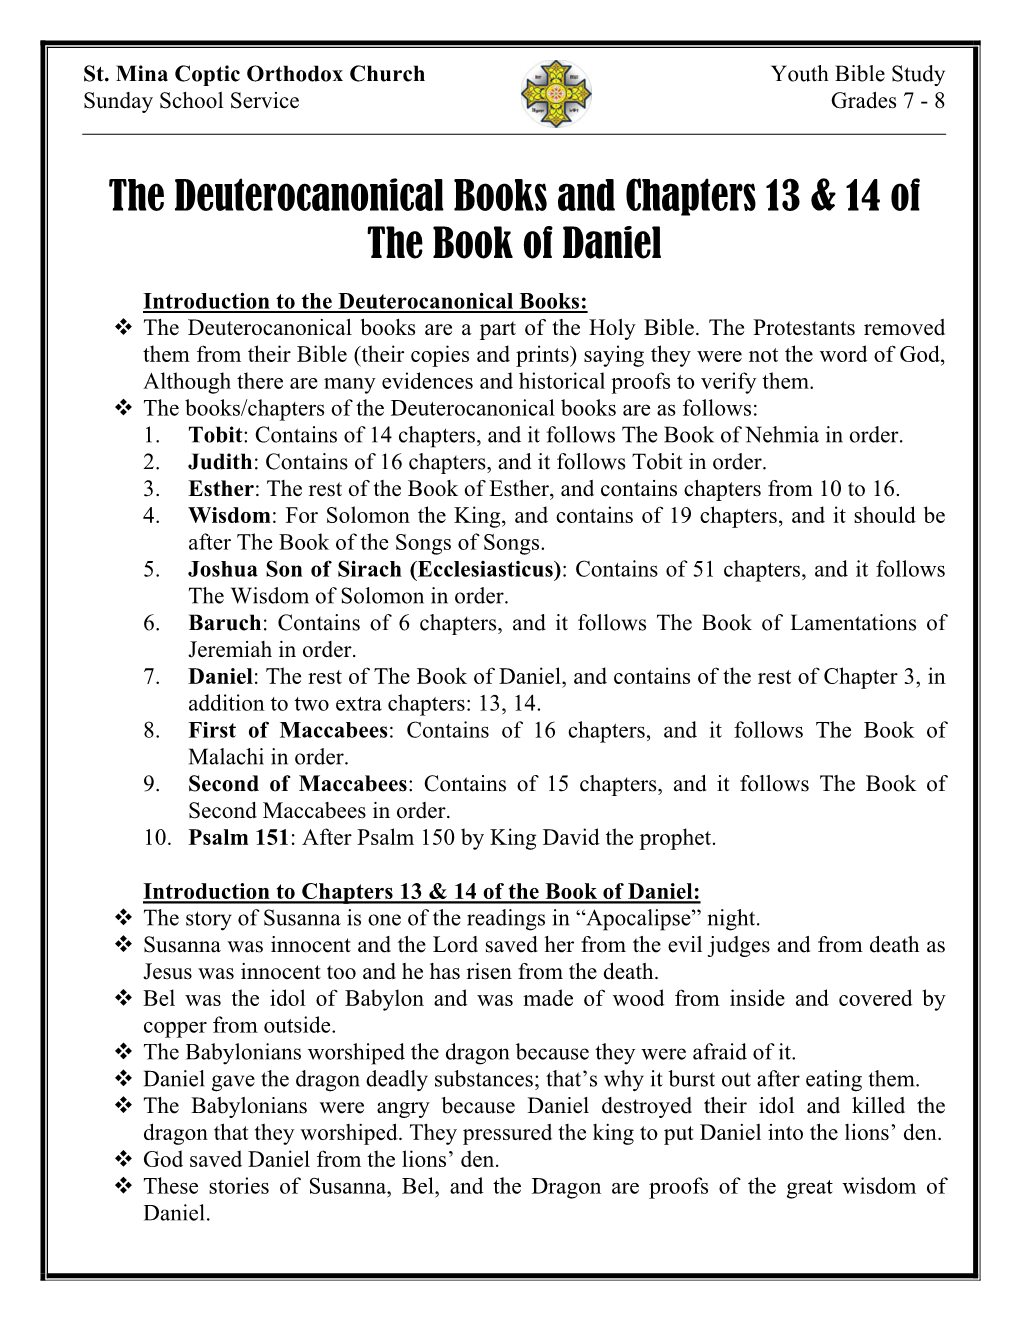 The Deuterocanonical Books and Chapters 13 & 14 of the Book Of